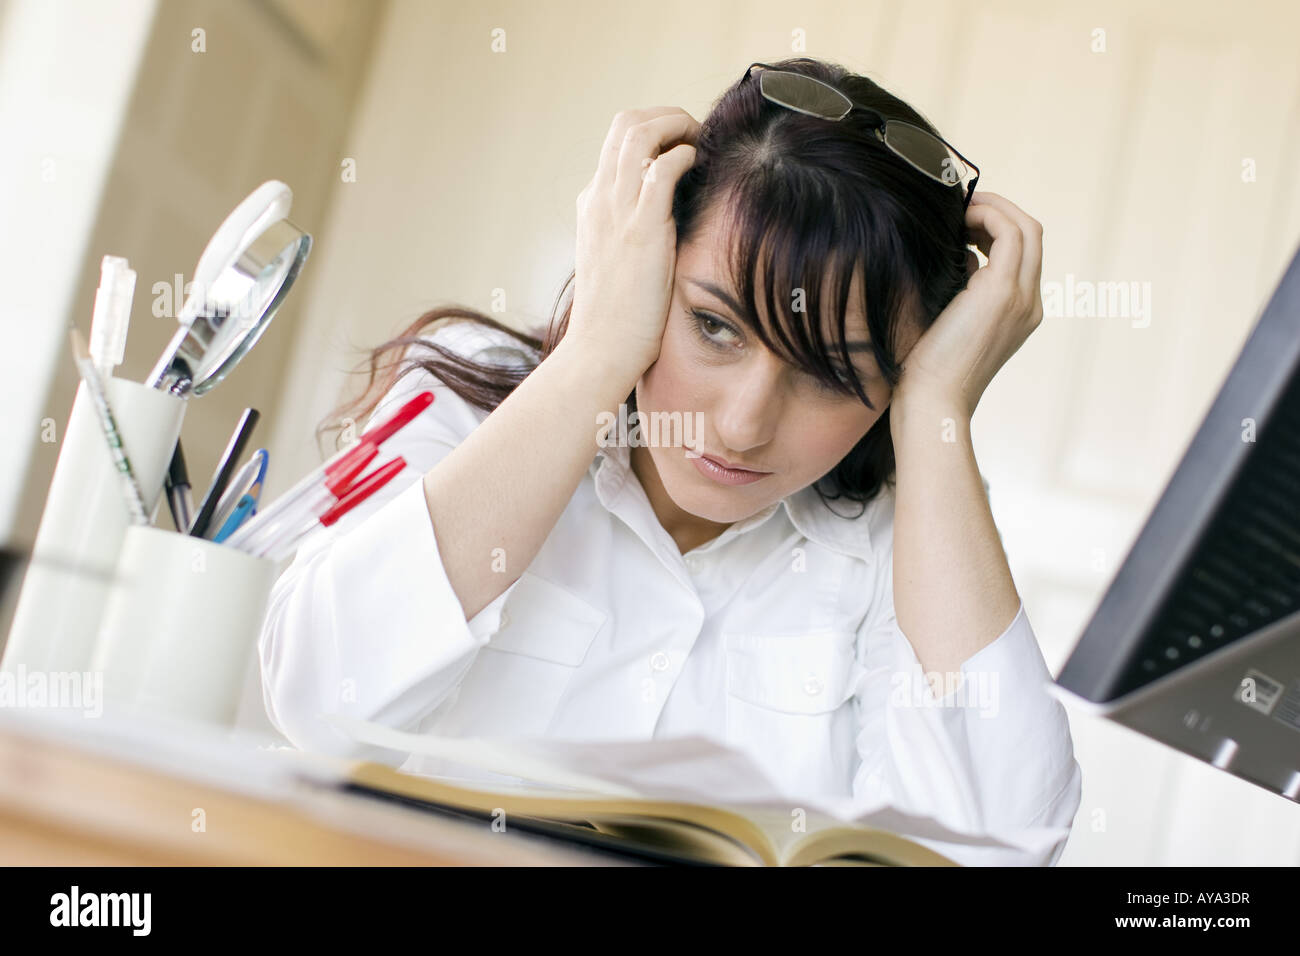 Frustrated woman using computer Stock Photo